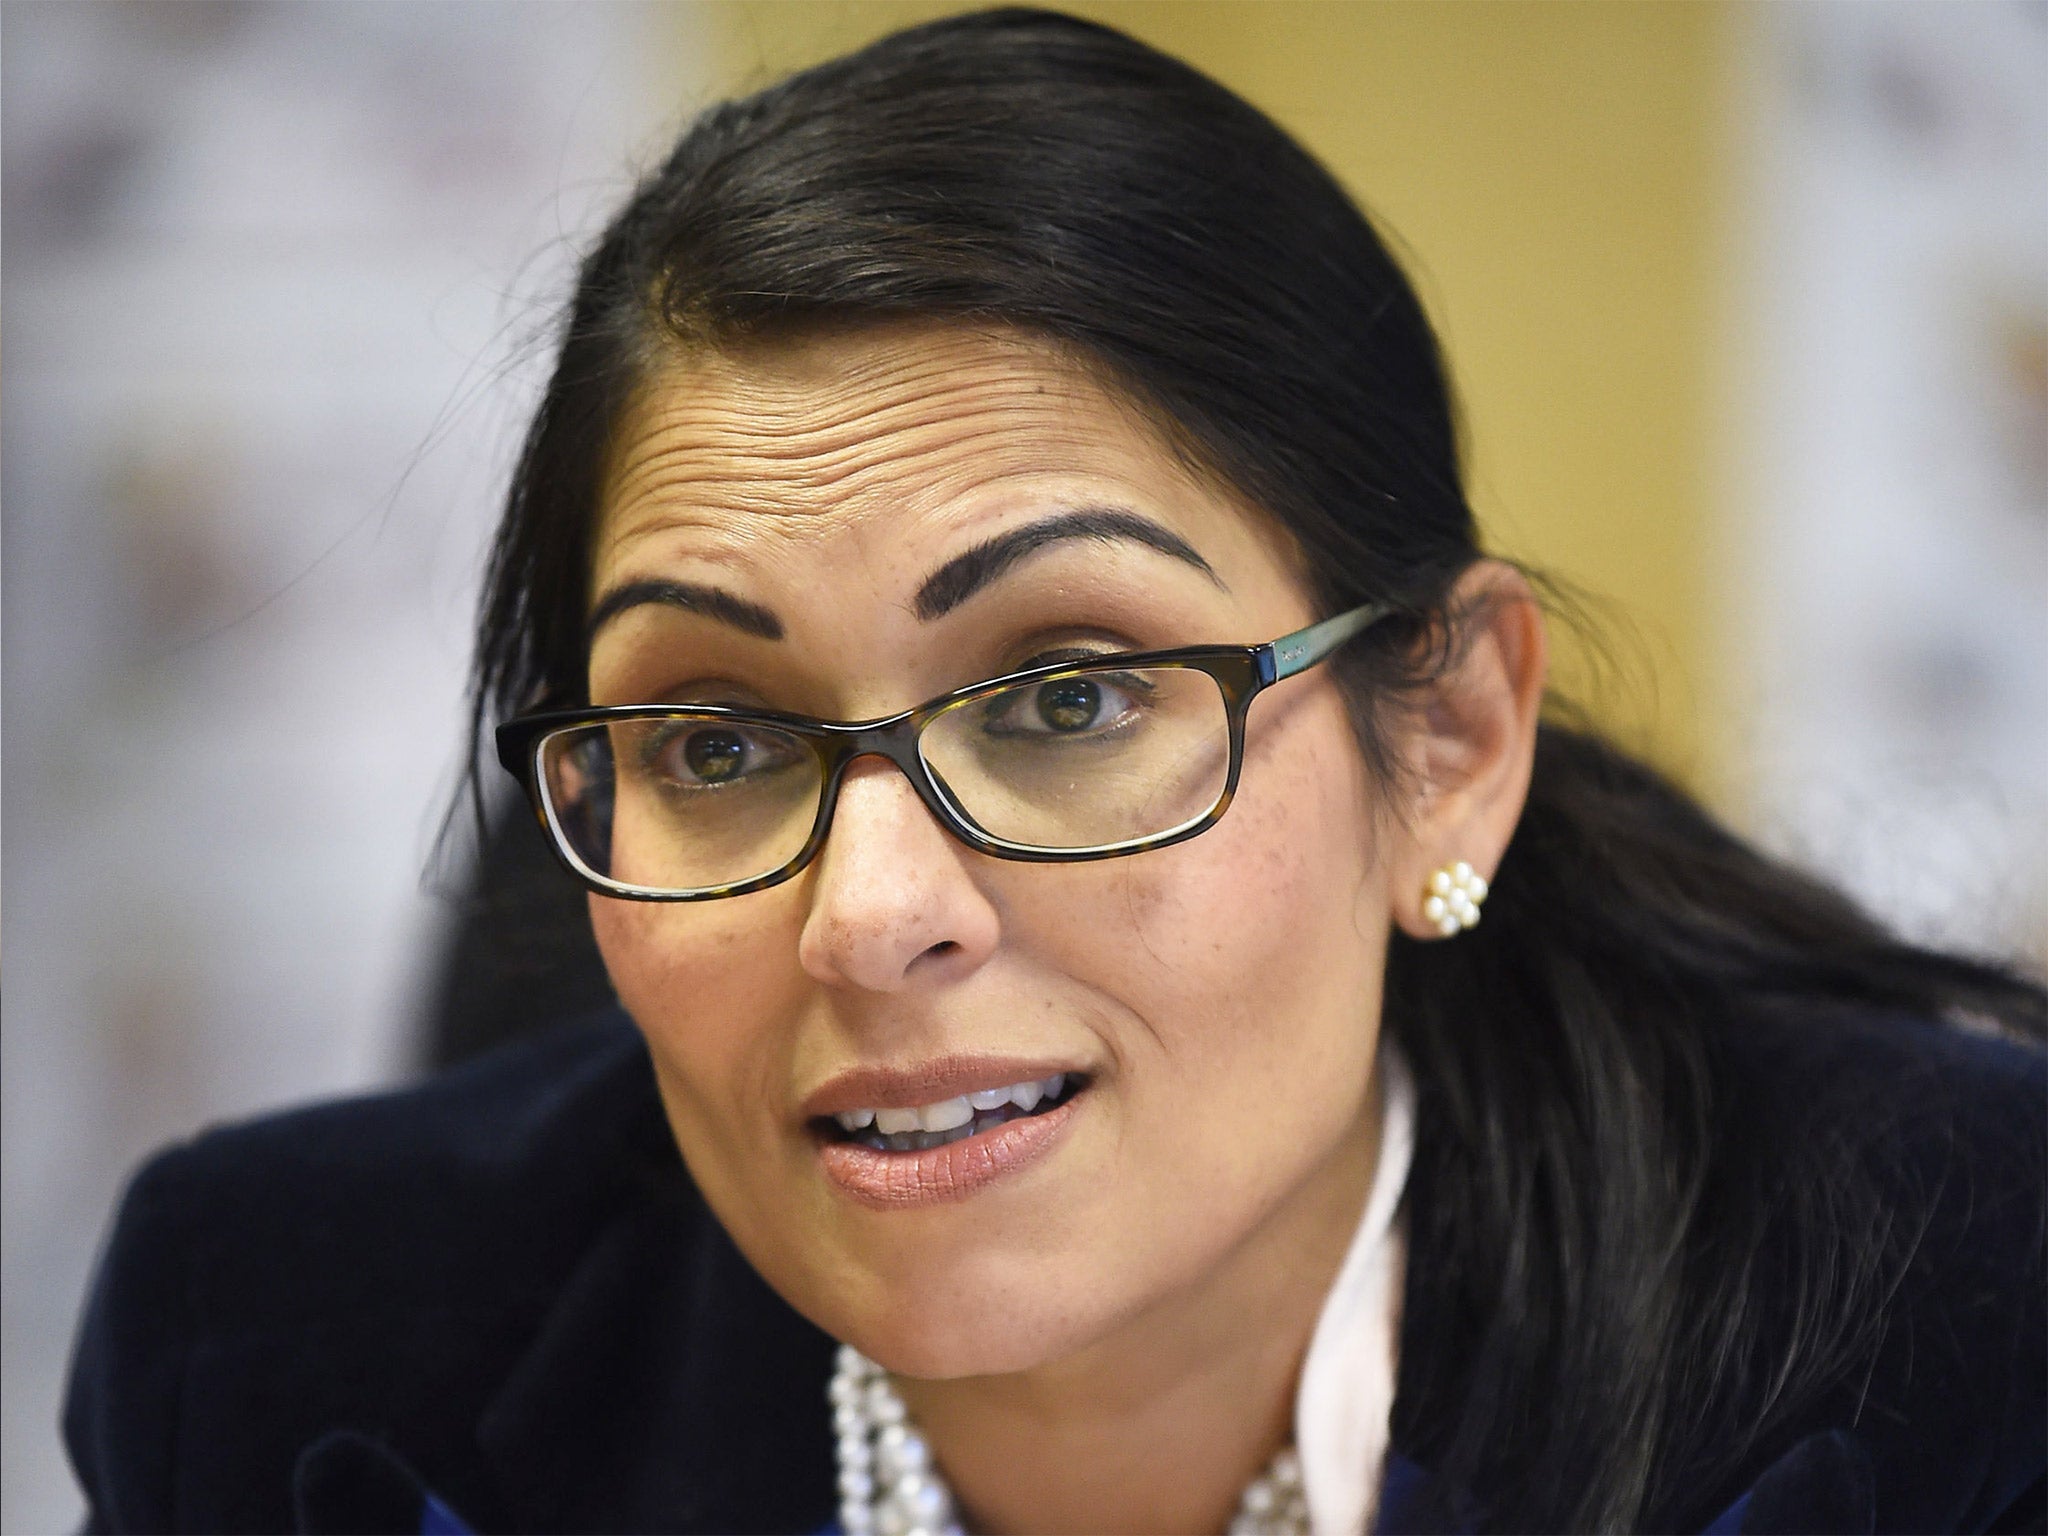 Priti Patel is part of the campaign group to leave the EU